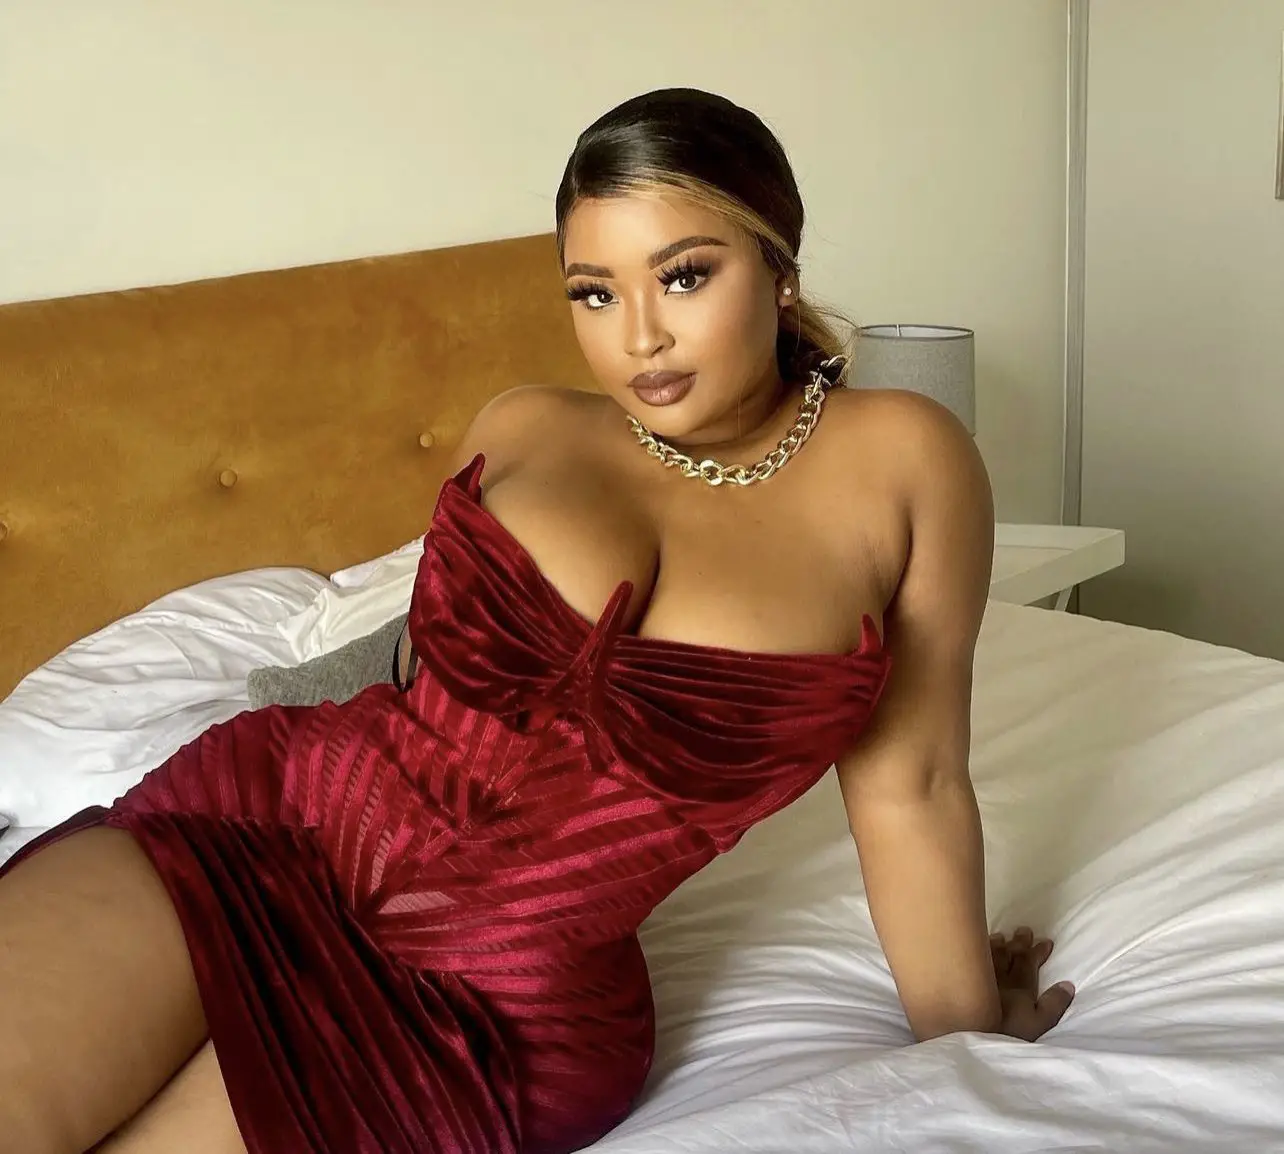 Rumours of another Cyan Boujee video floods social media